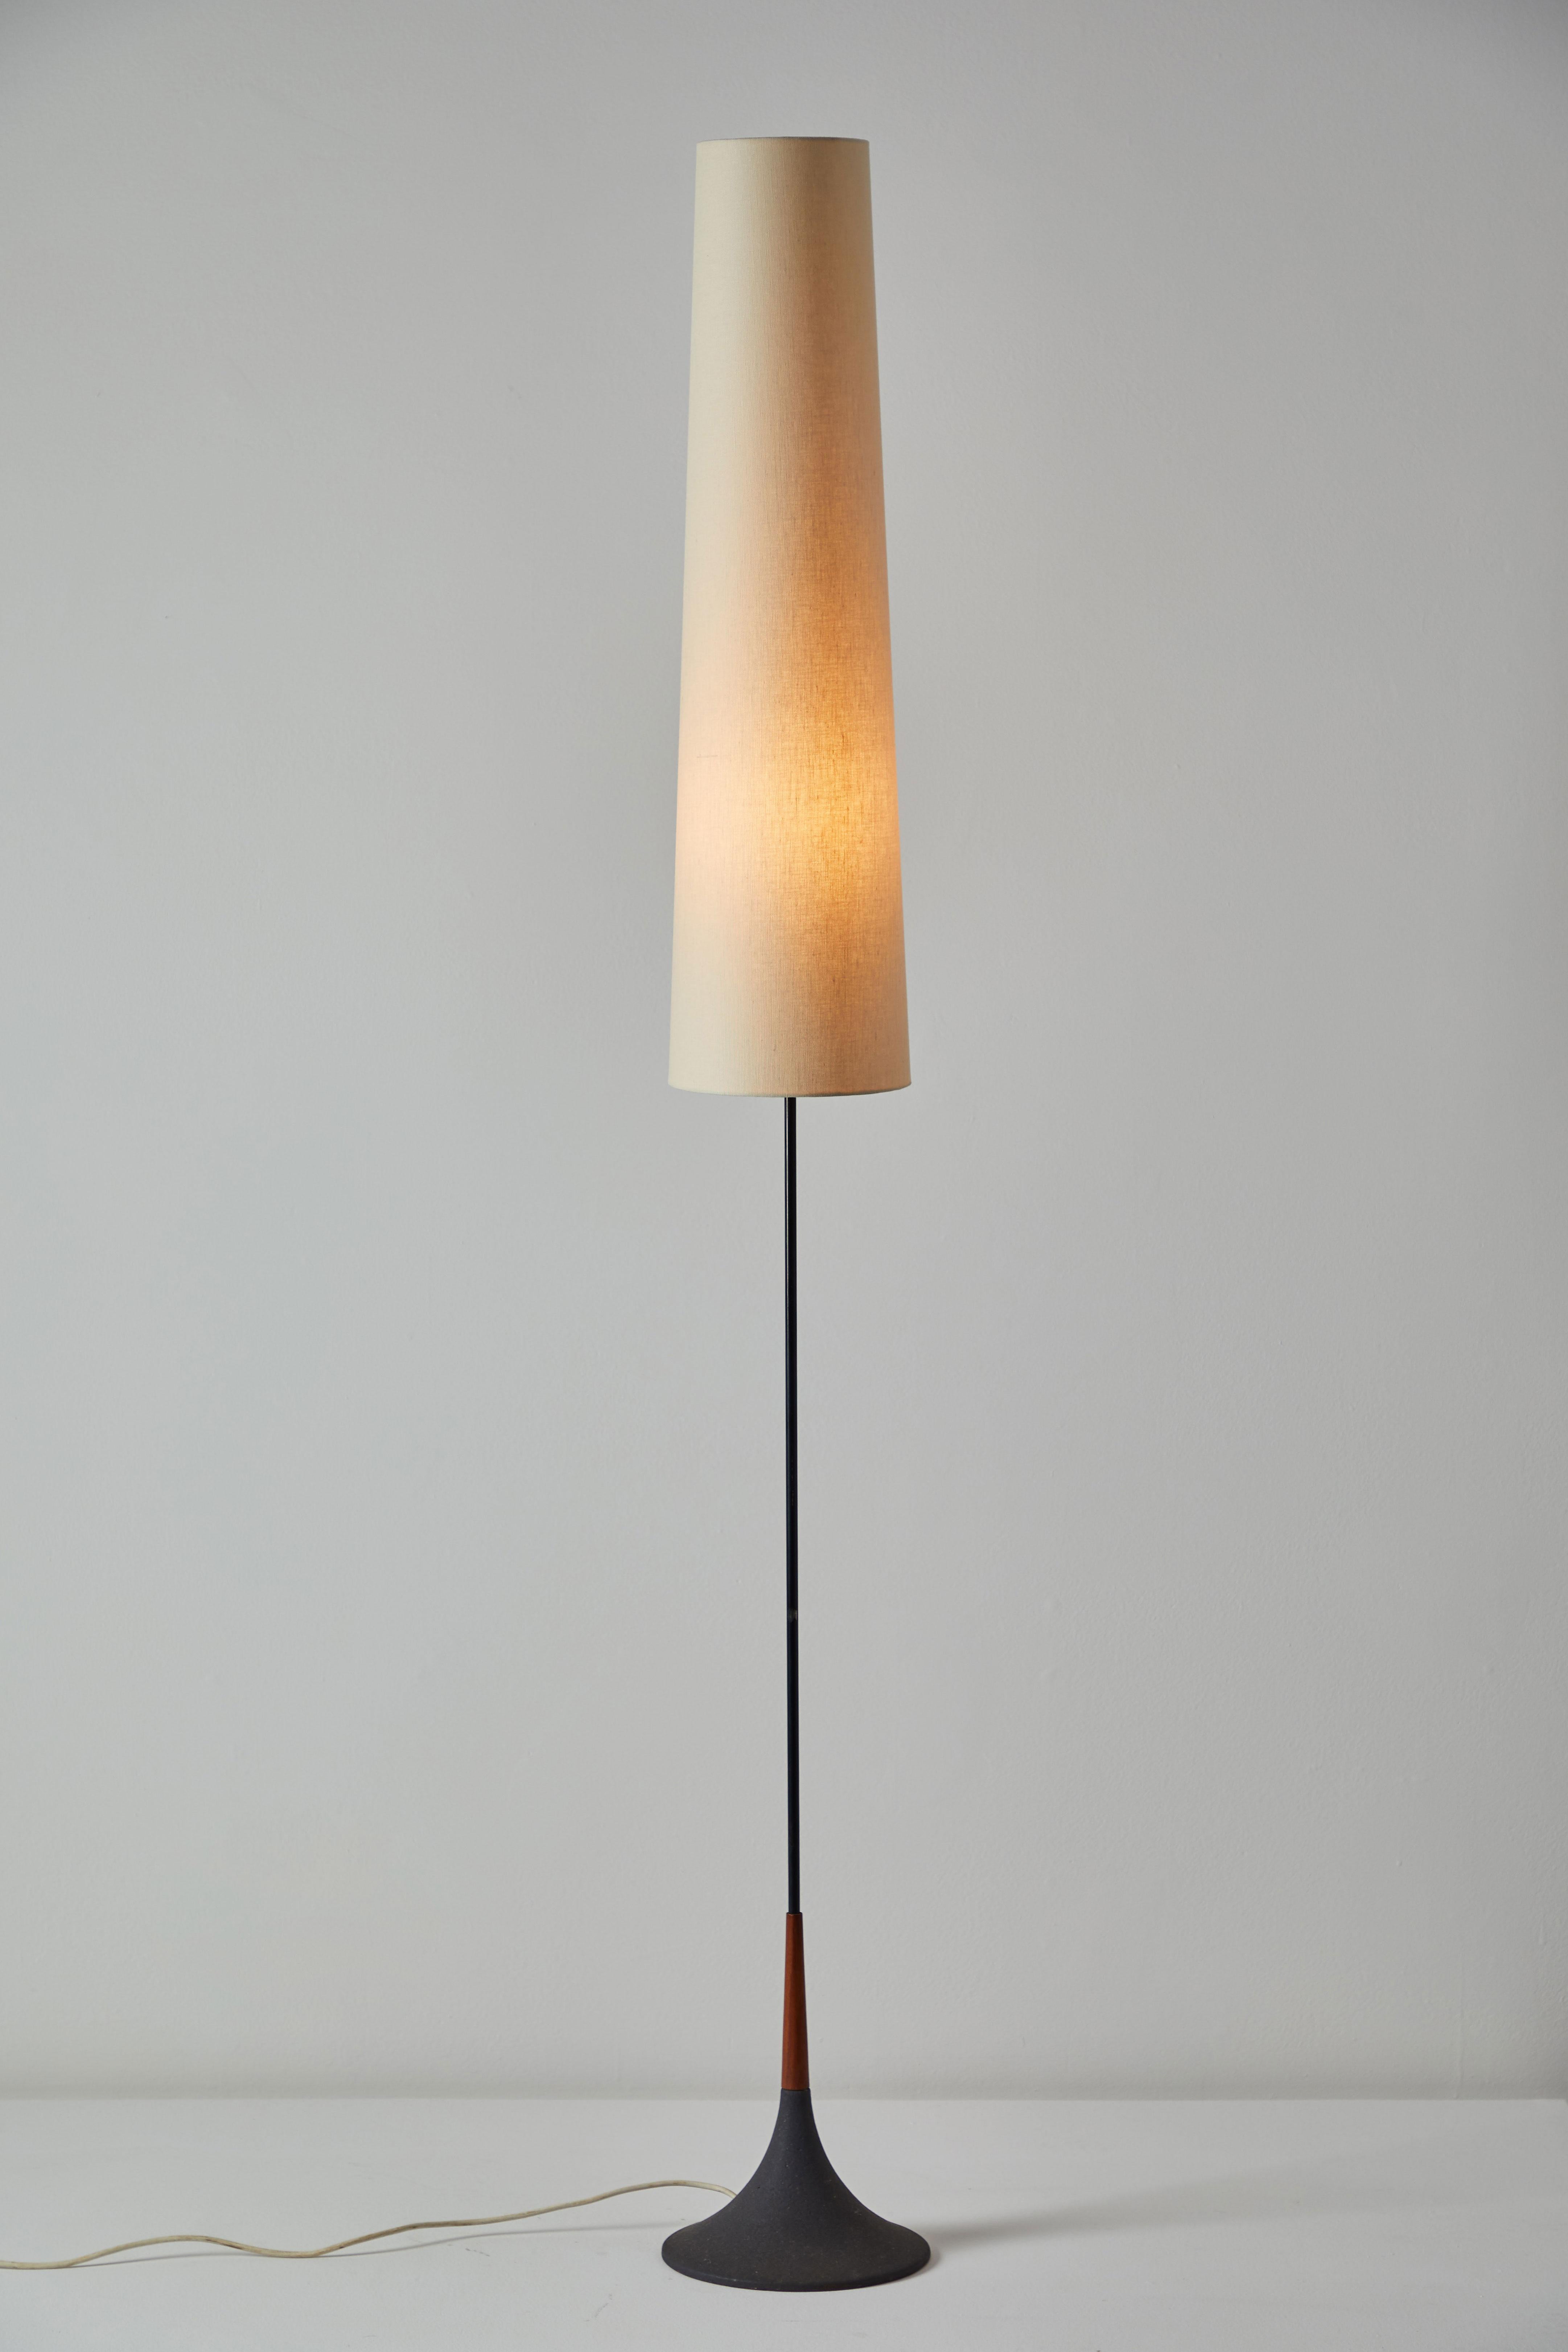 Floor lamp by Svend Aage Holm Sørensen. Designed and manufactured in Sweden, circa 1950s. Cast iron base, teak and black lacquered metal stem. Original cord. Custom fabricated linen shade. Takes one E27 60w maximum bulb.